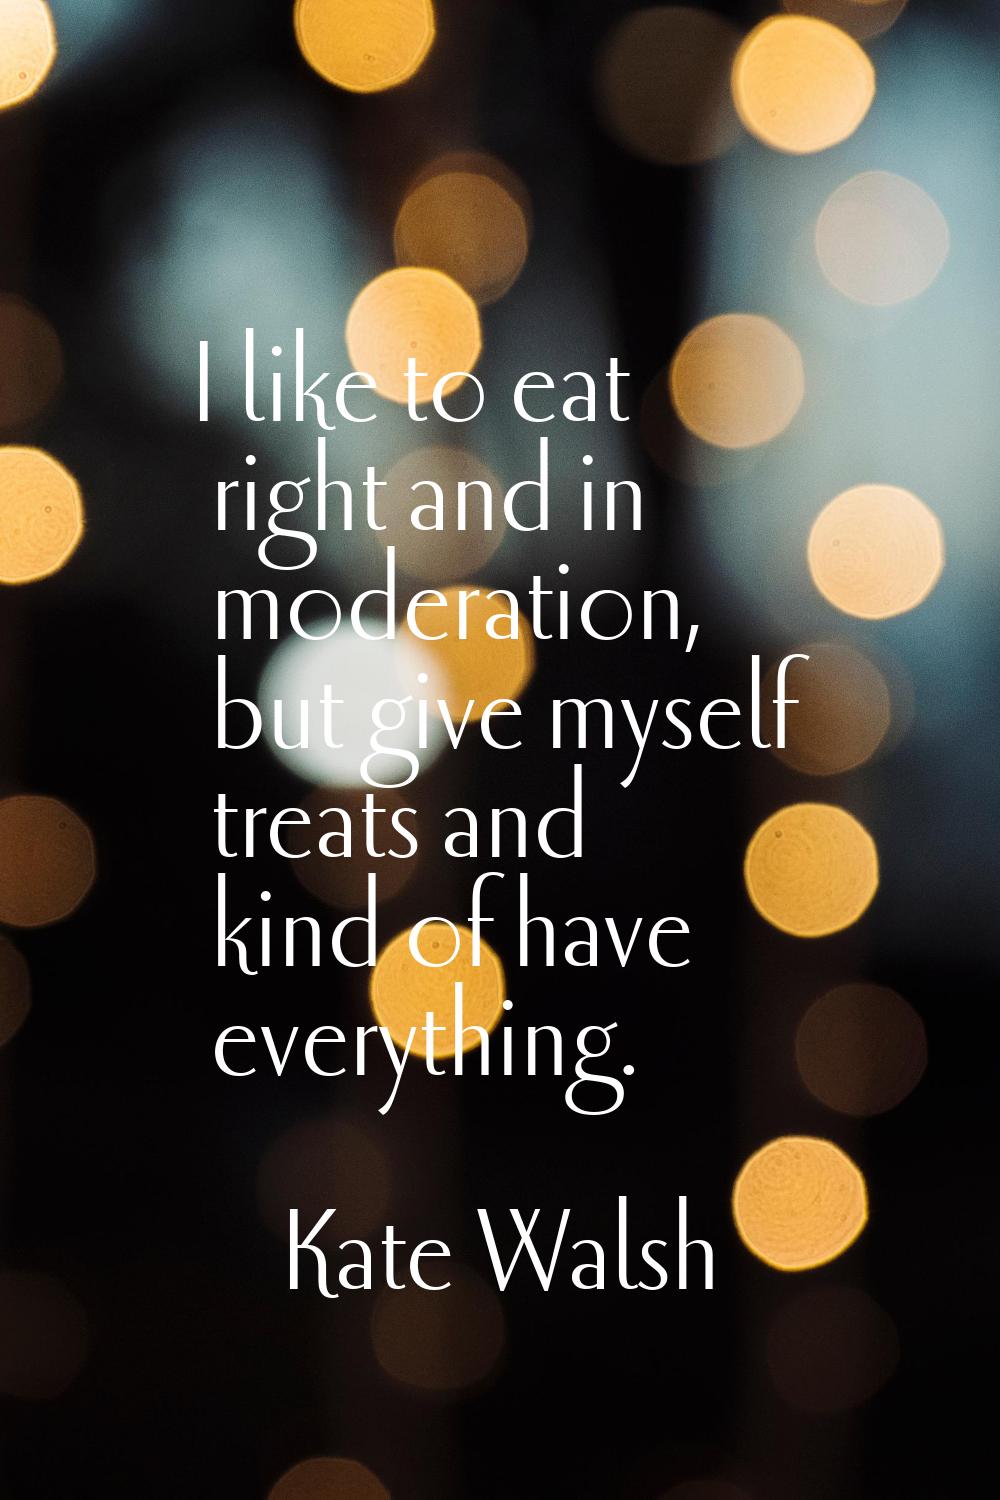 I like to eat right and in moderation, but give myself treats and kind of have everything.